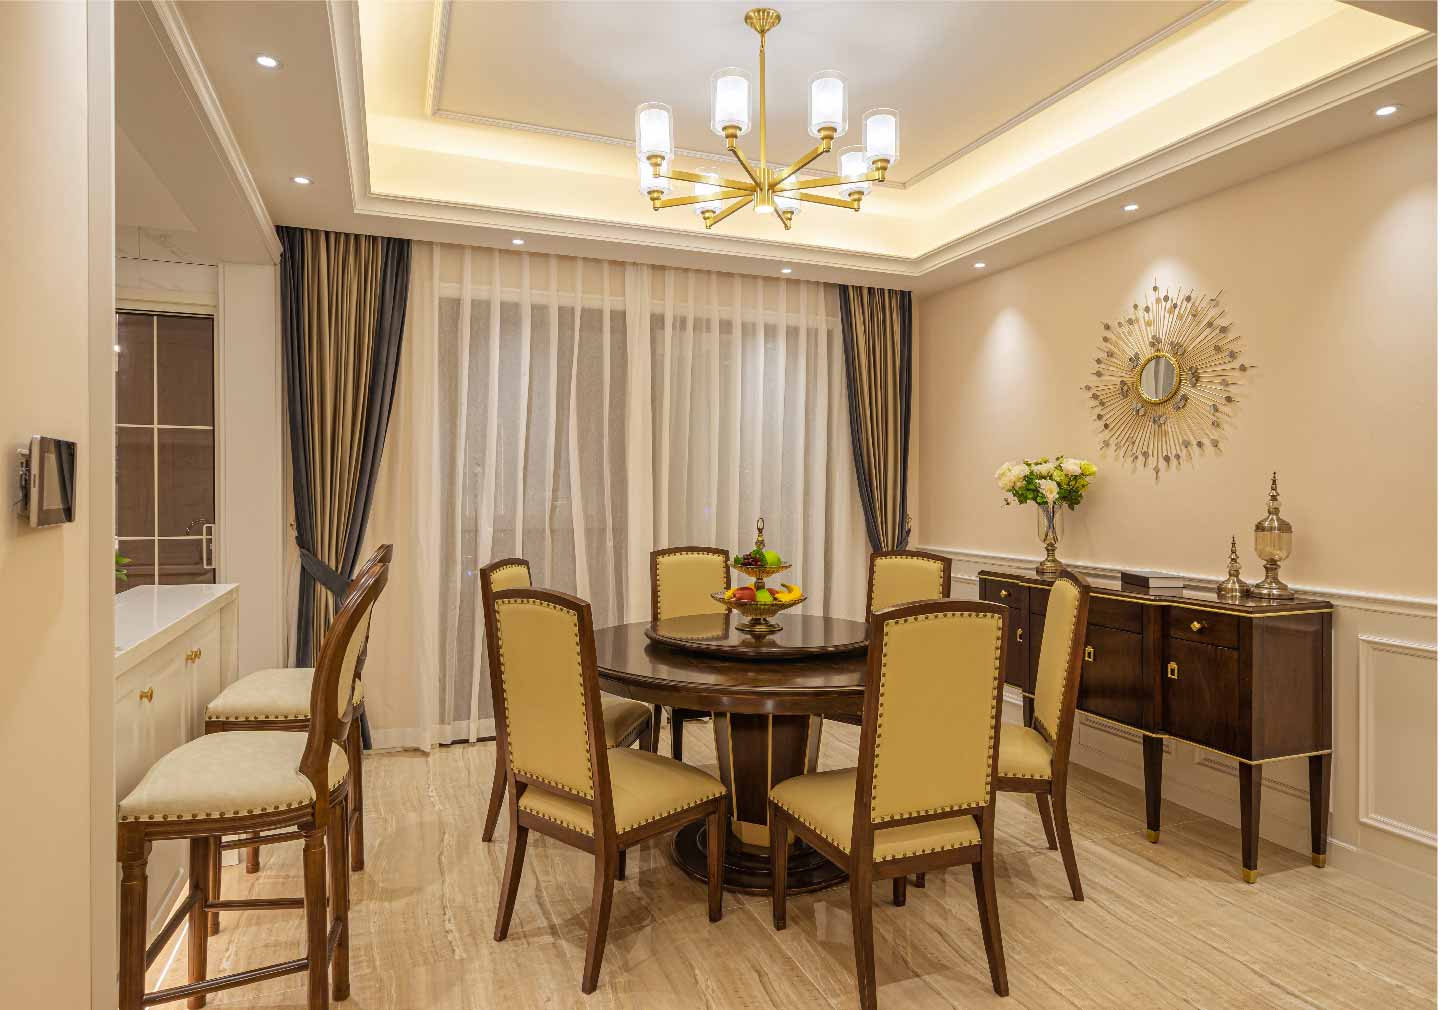 Fantastic Dining Room Design Ideas with 5 chairs and a round table